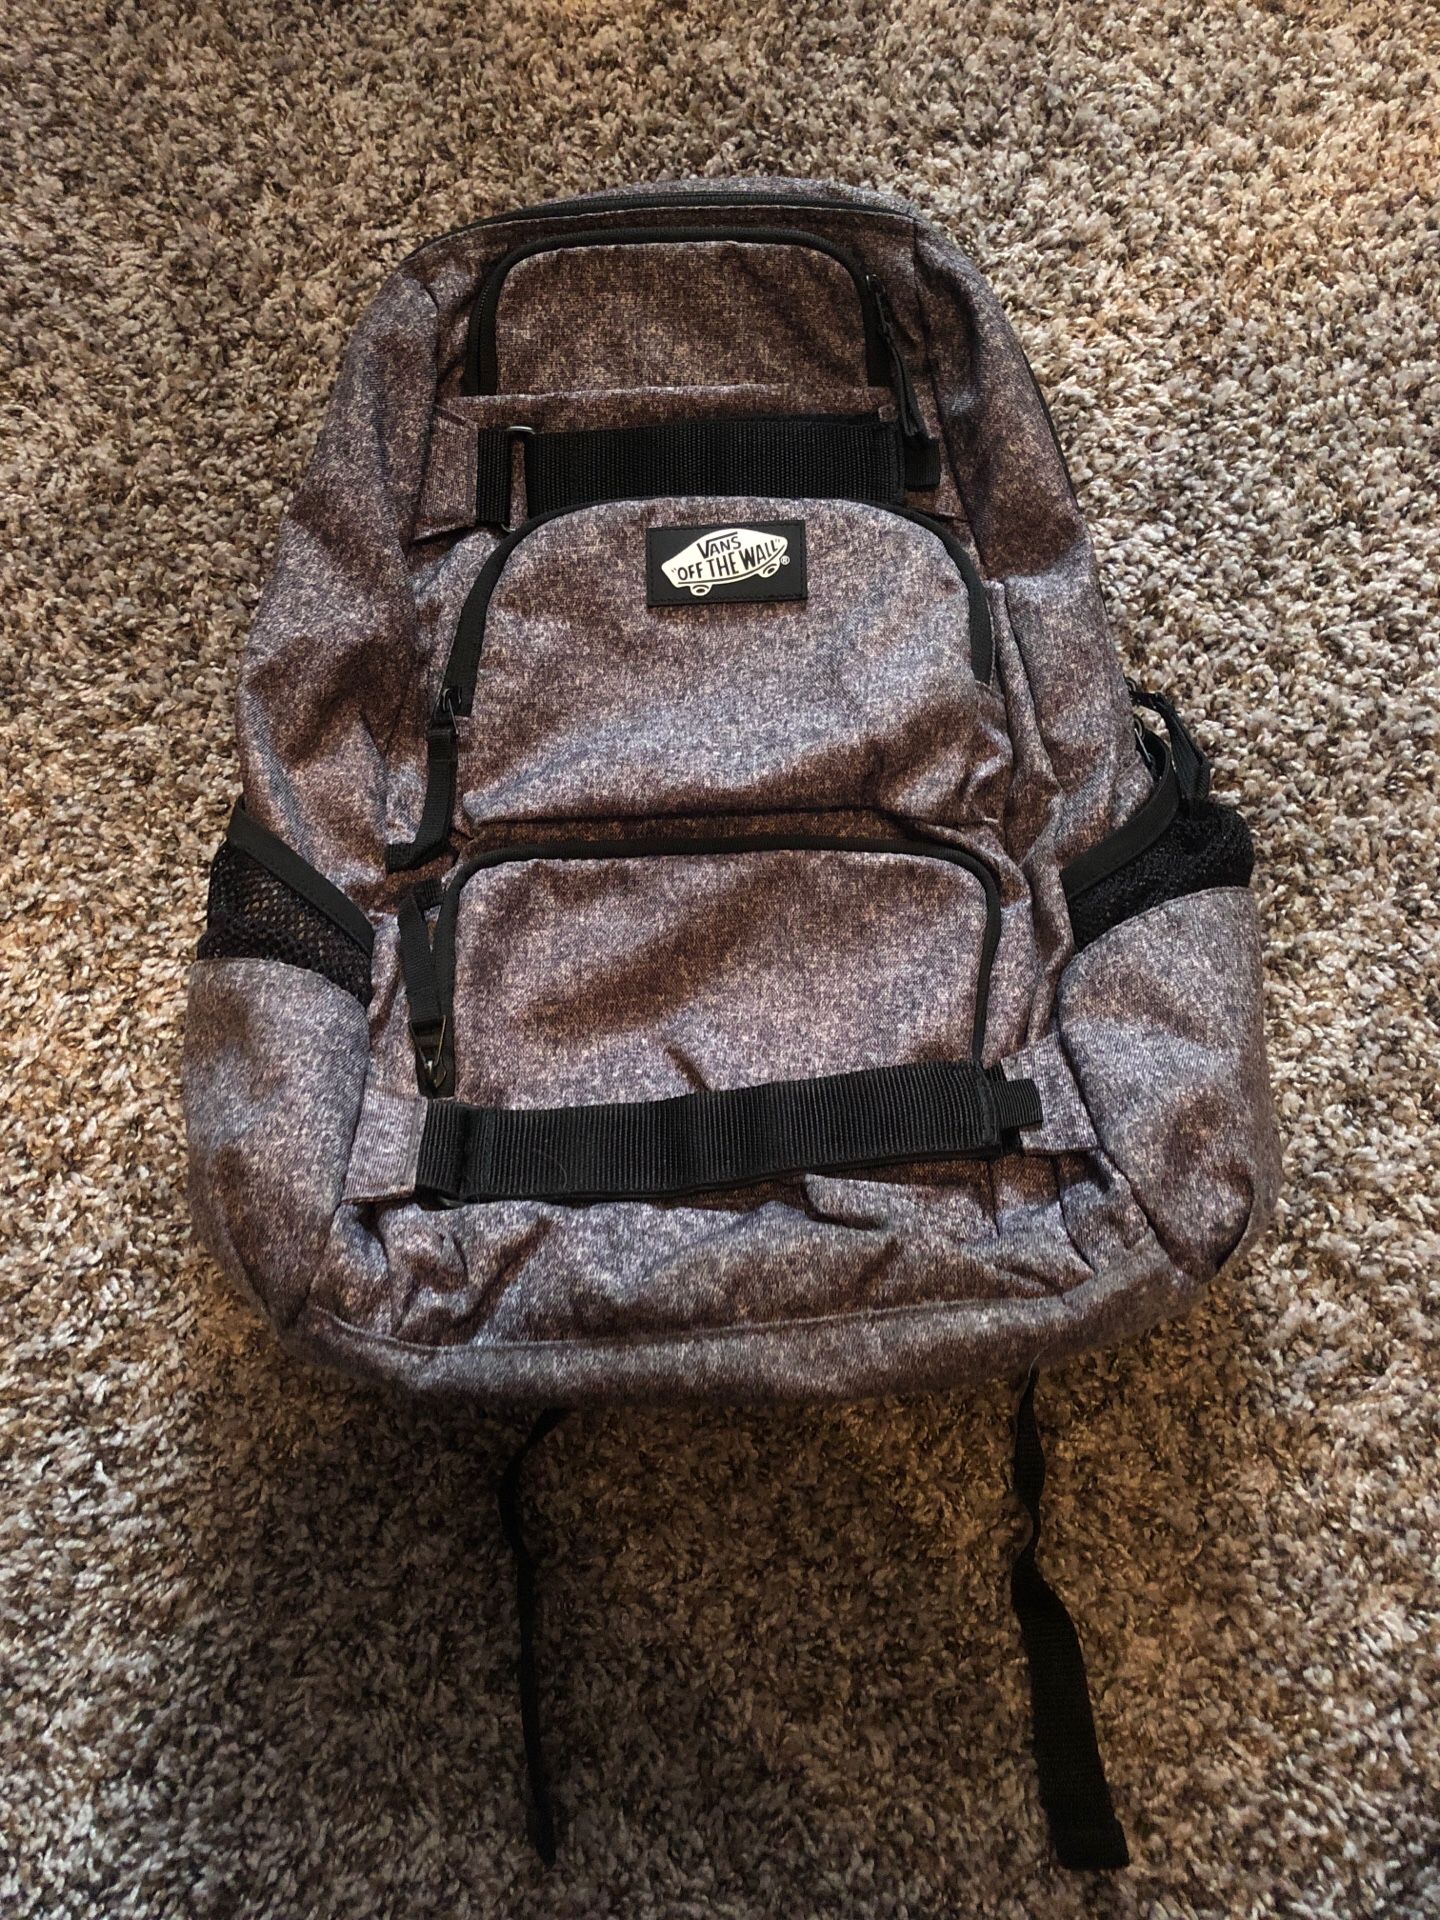 Vans off the wall back pack